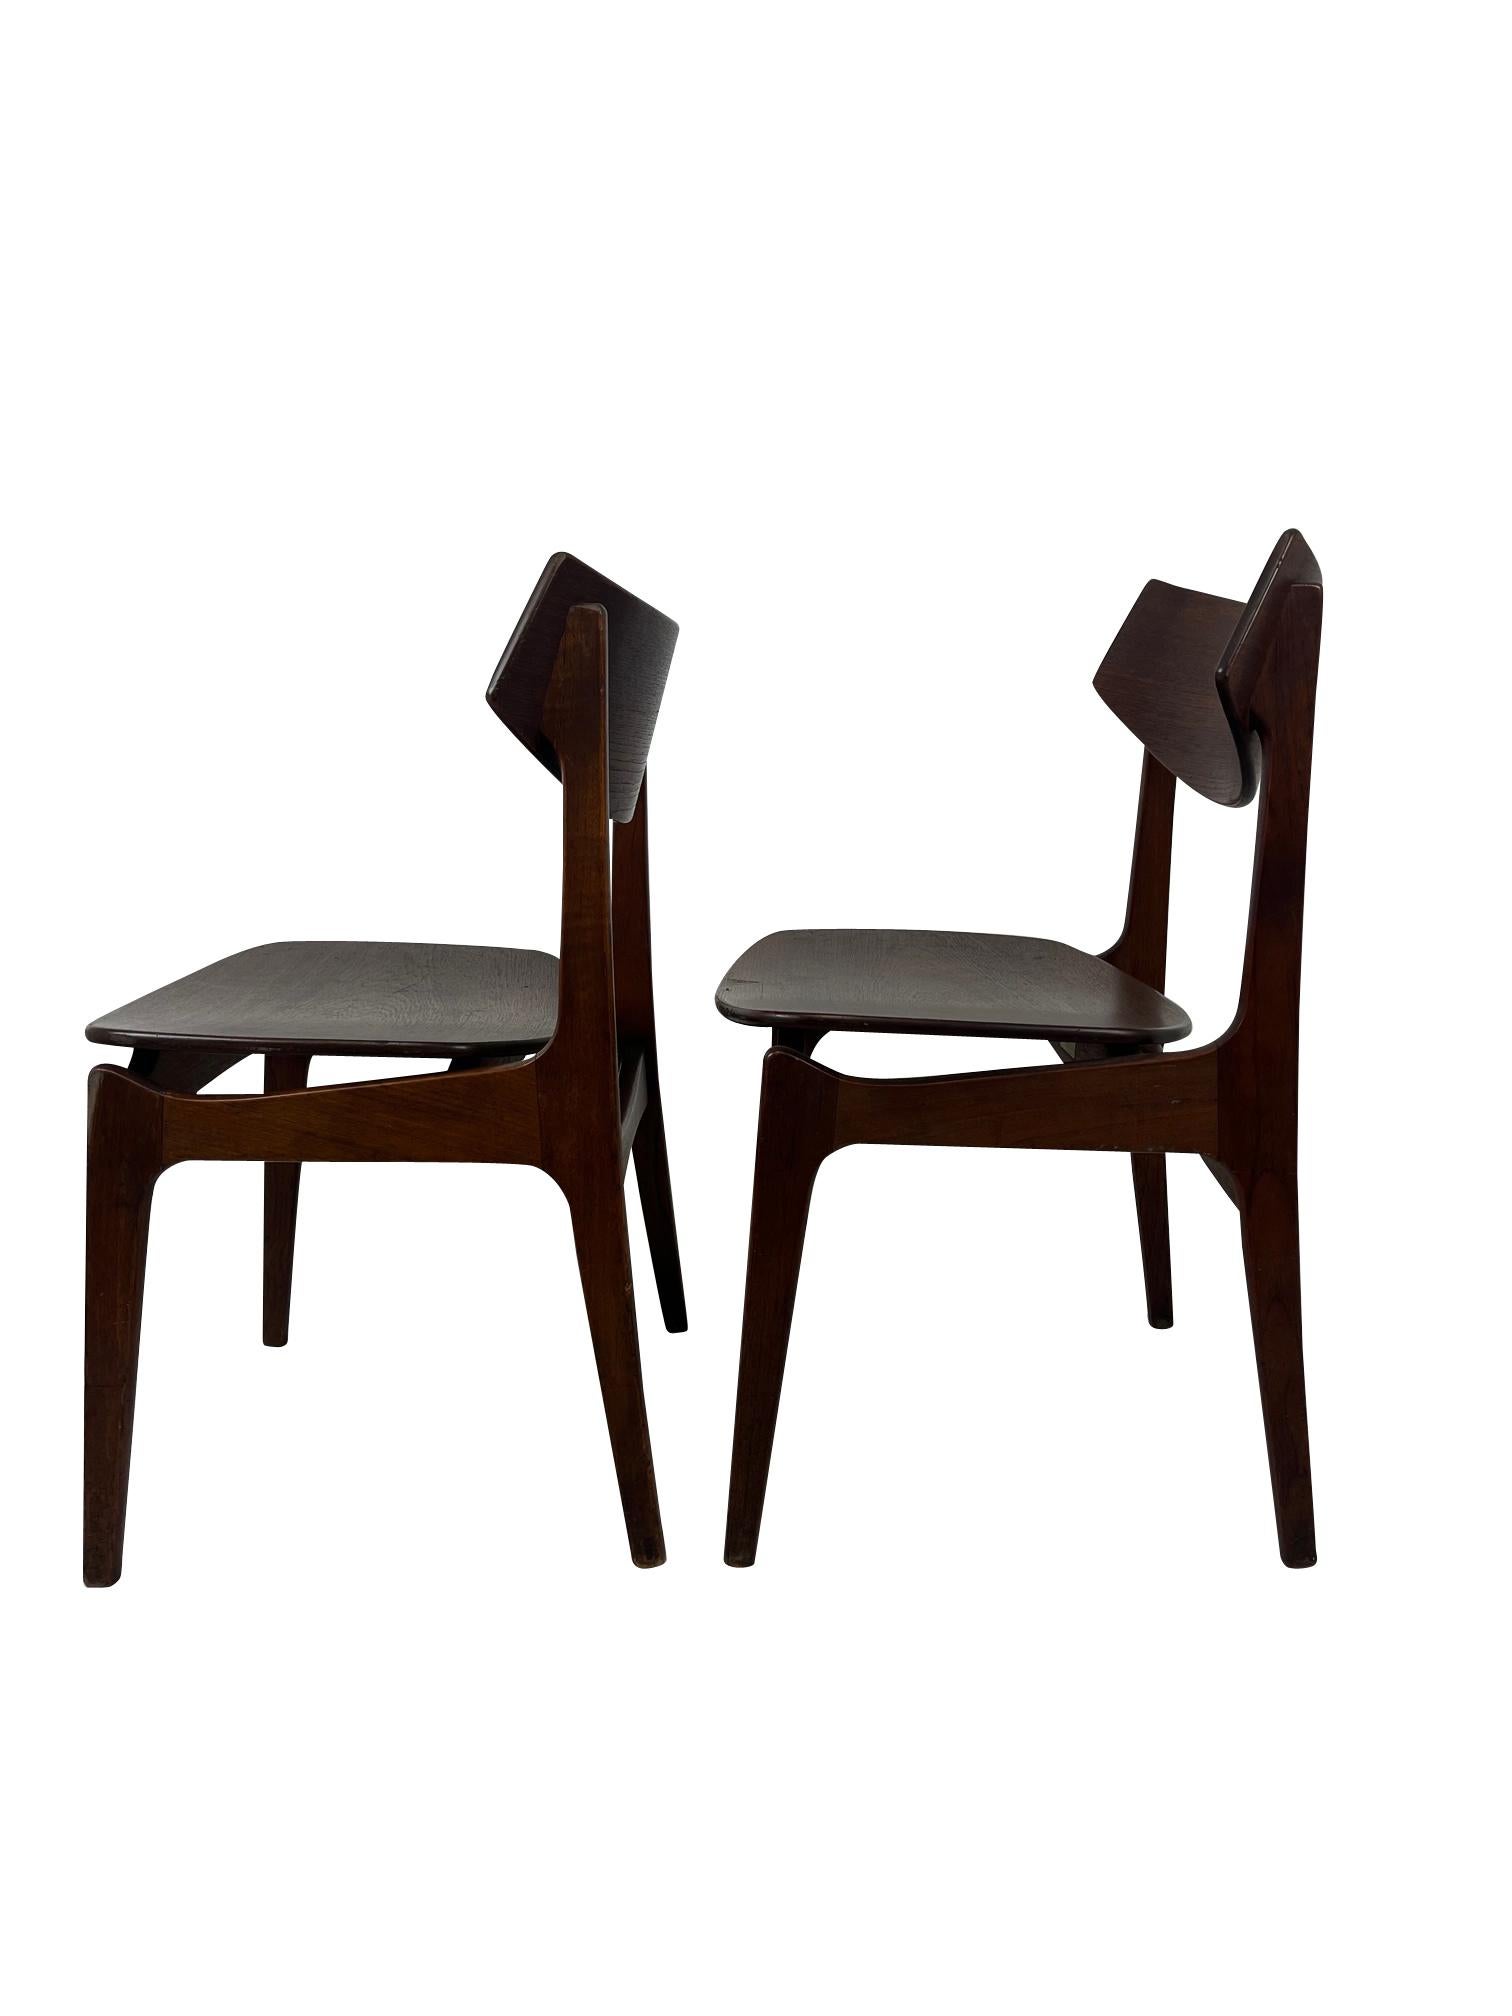 20th Century 2 Mid Century Danish Chairs by Funder-Schmidt and Madsen